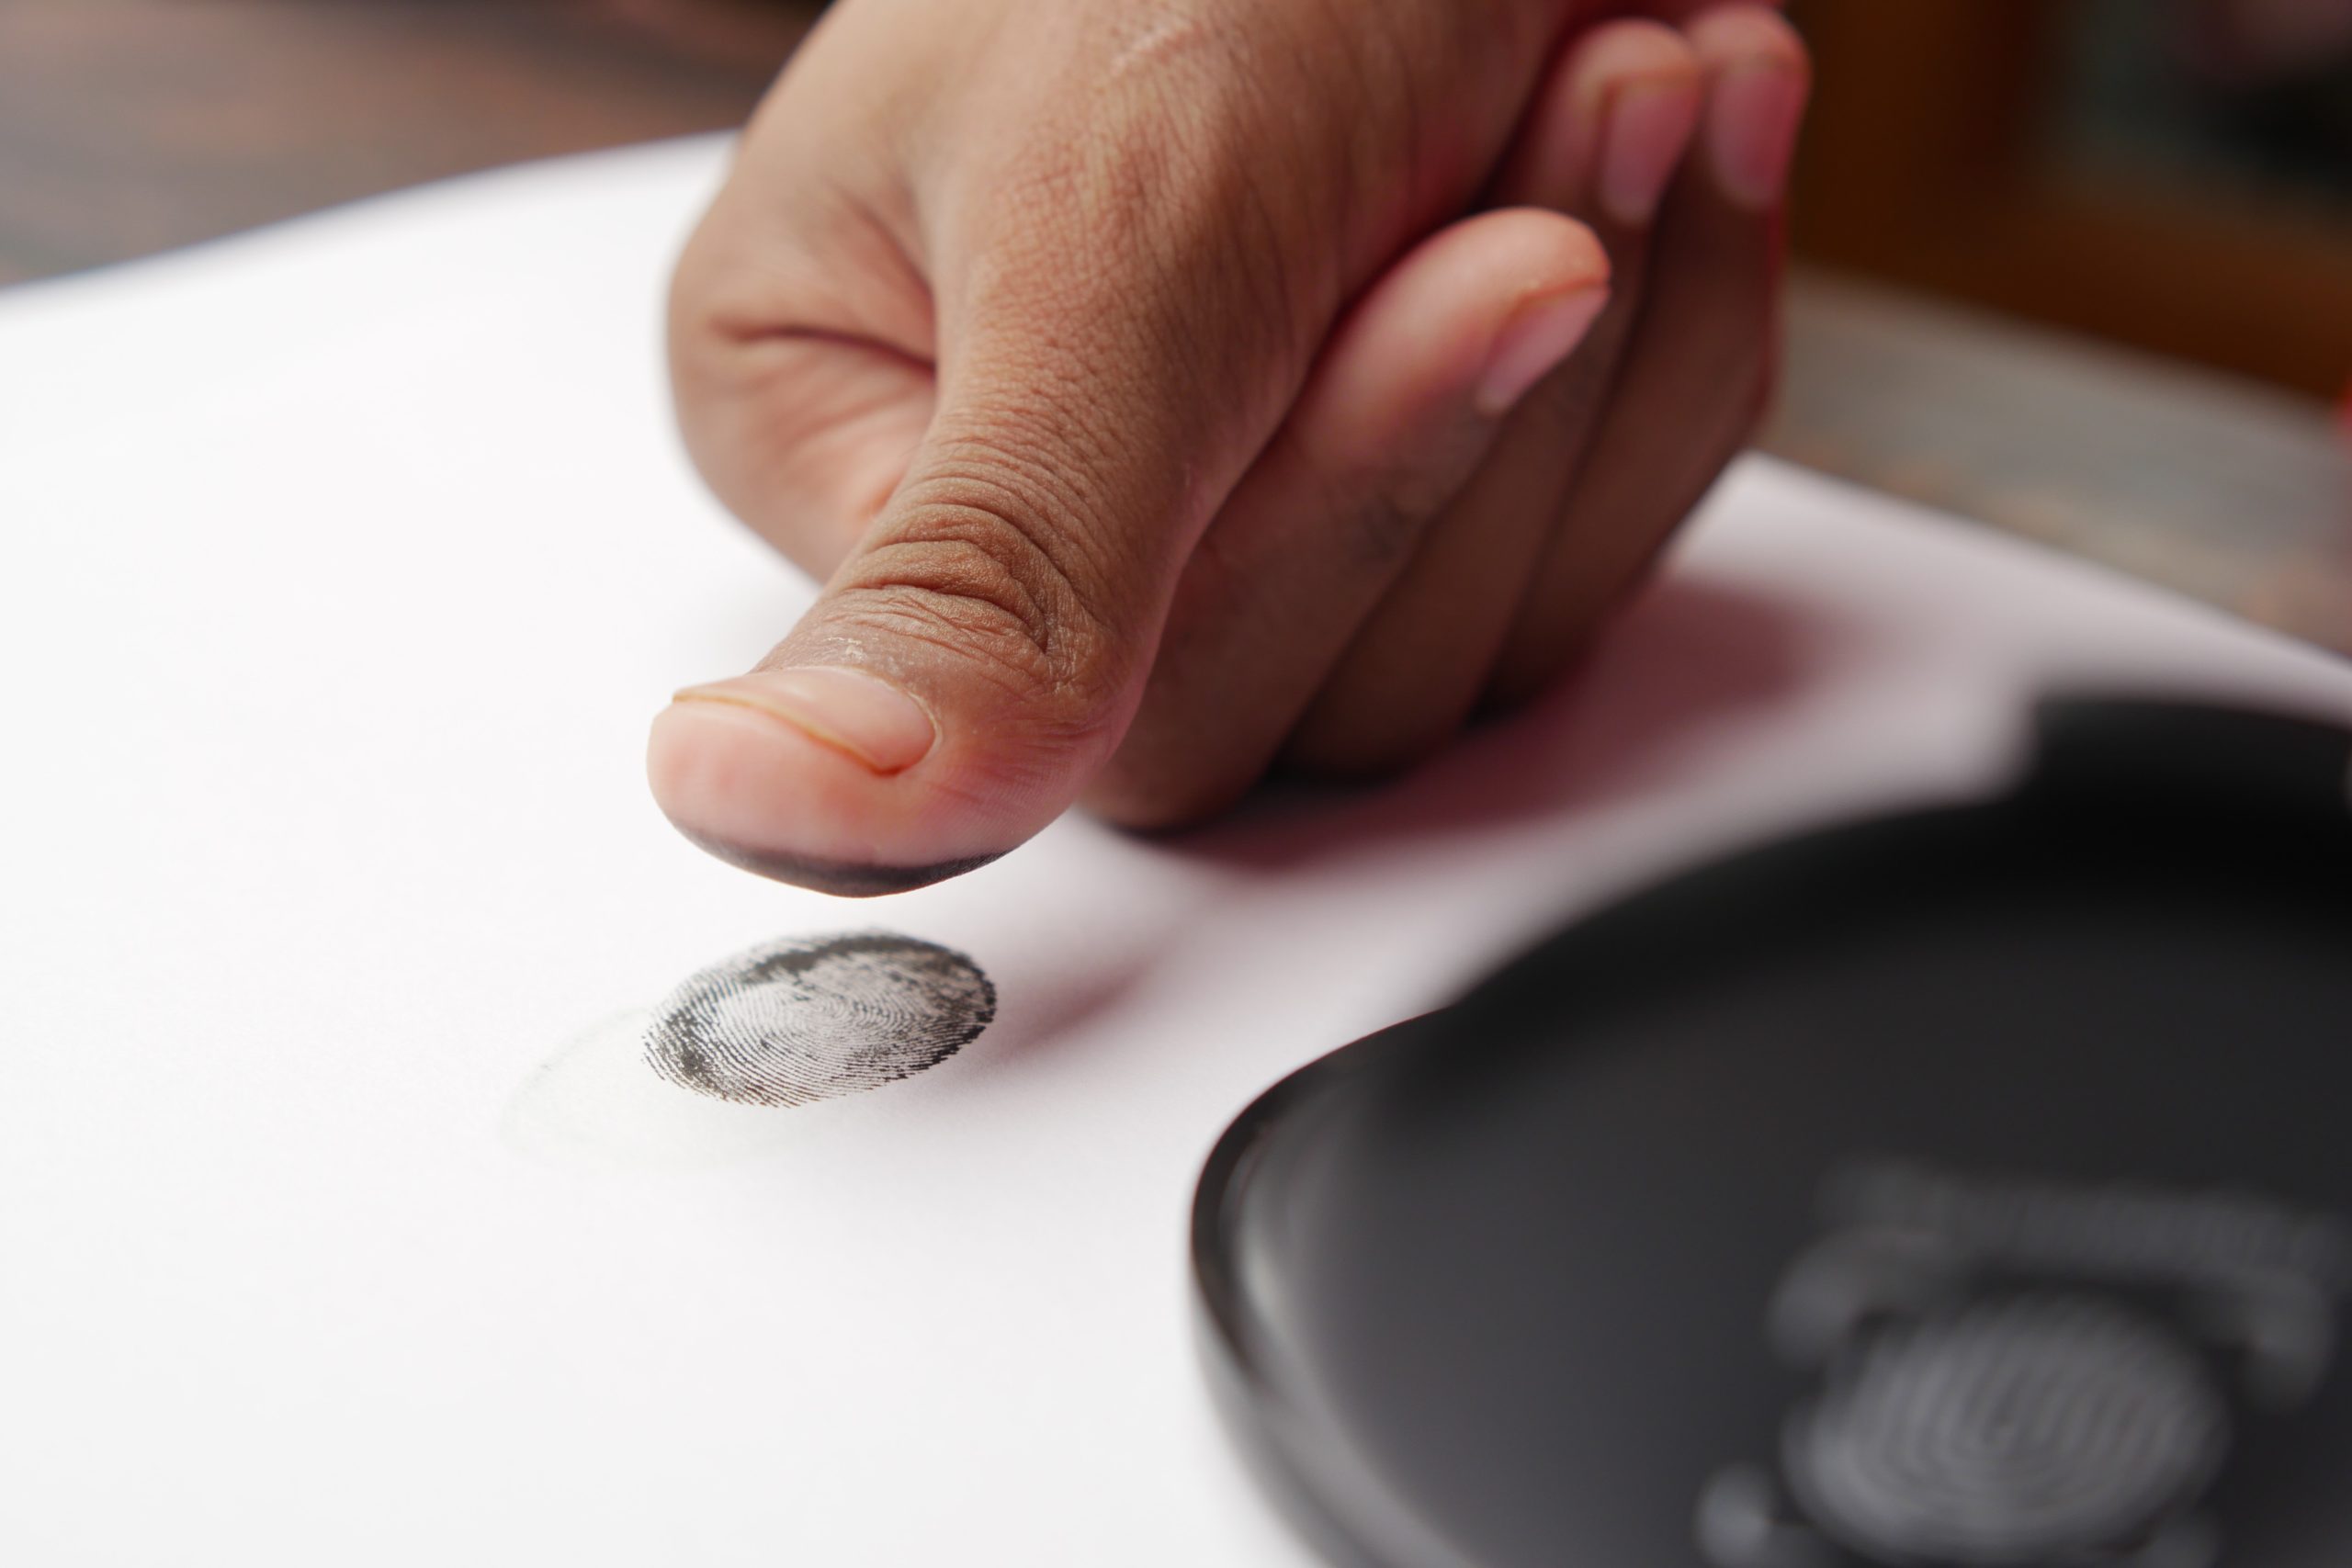 the process of finger printing